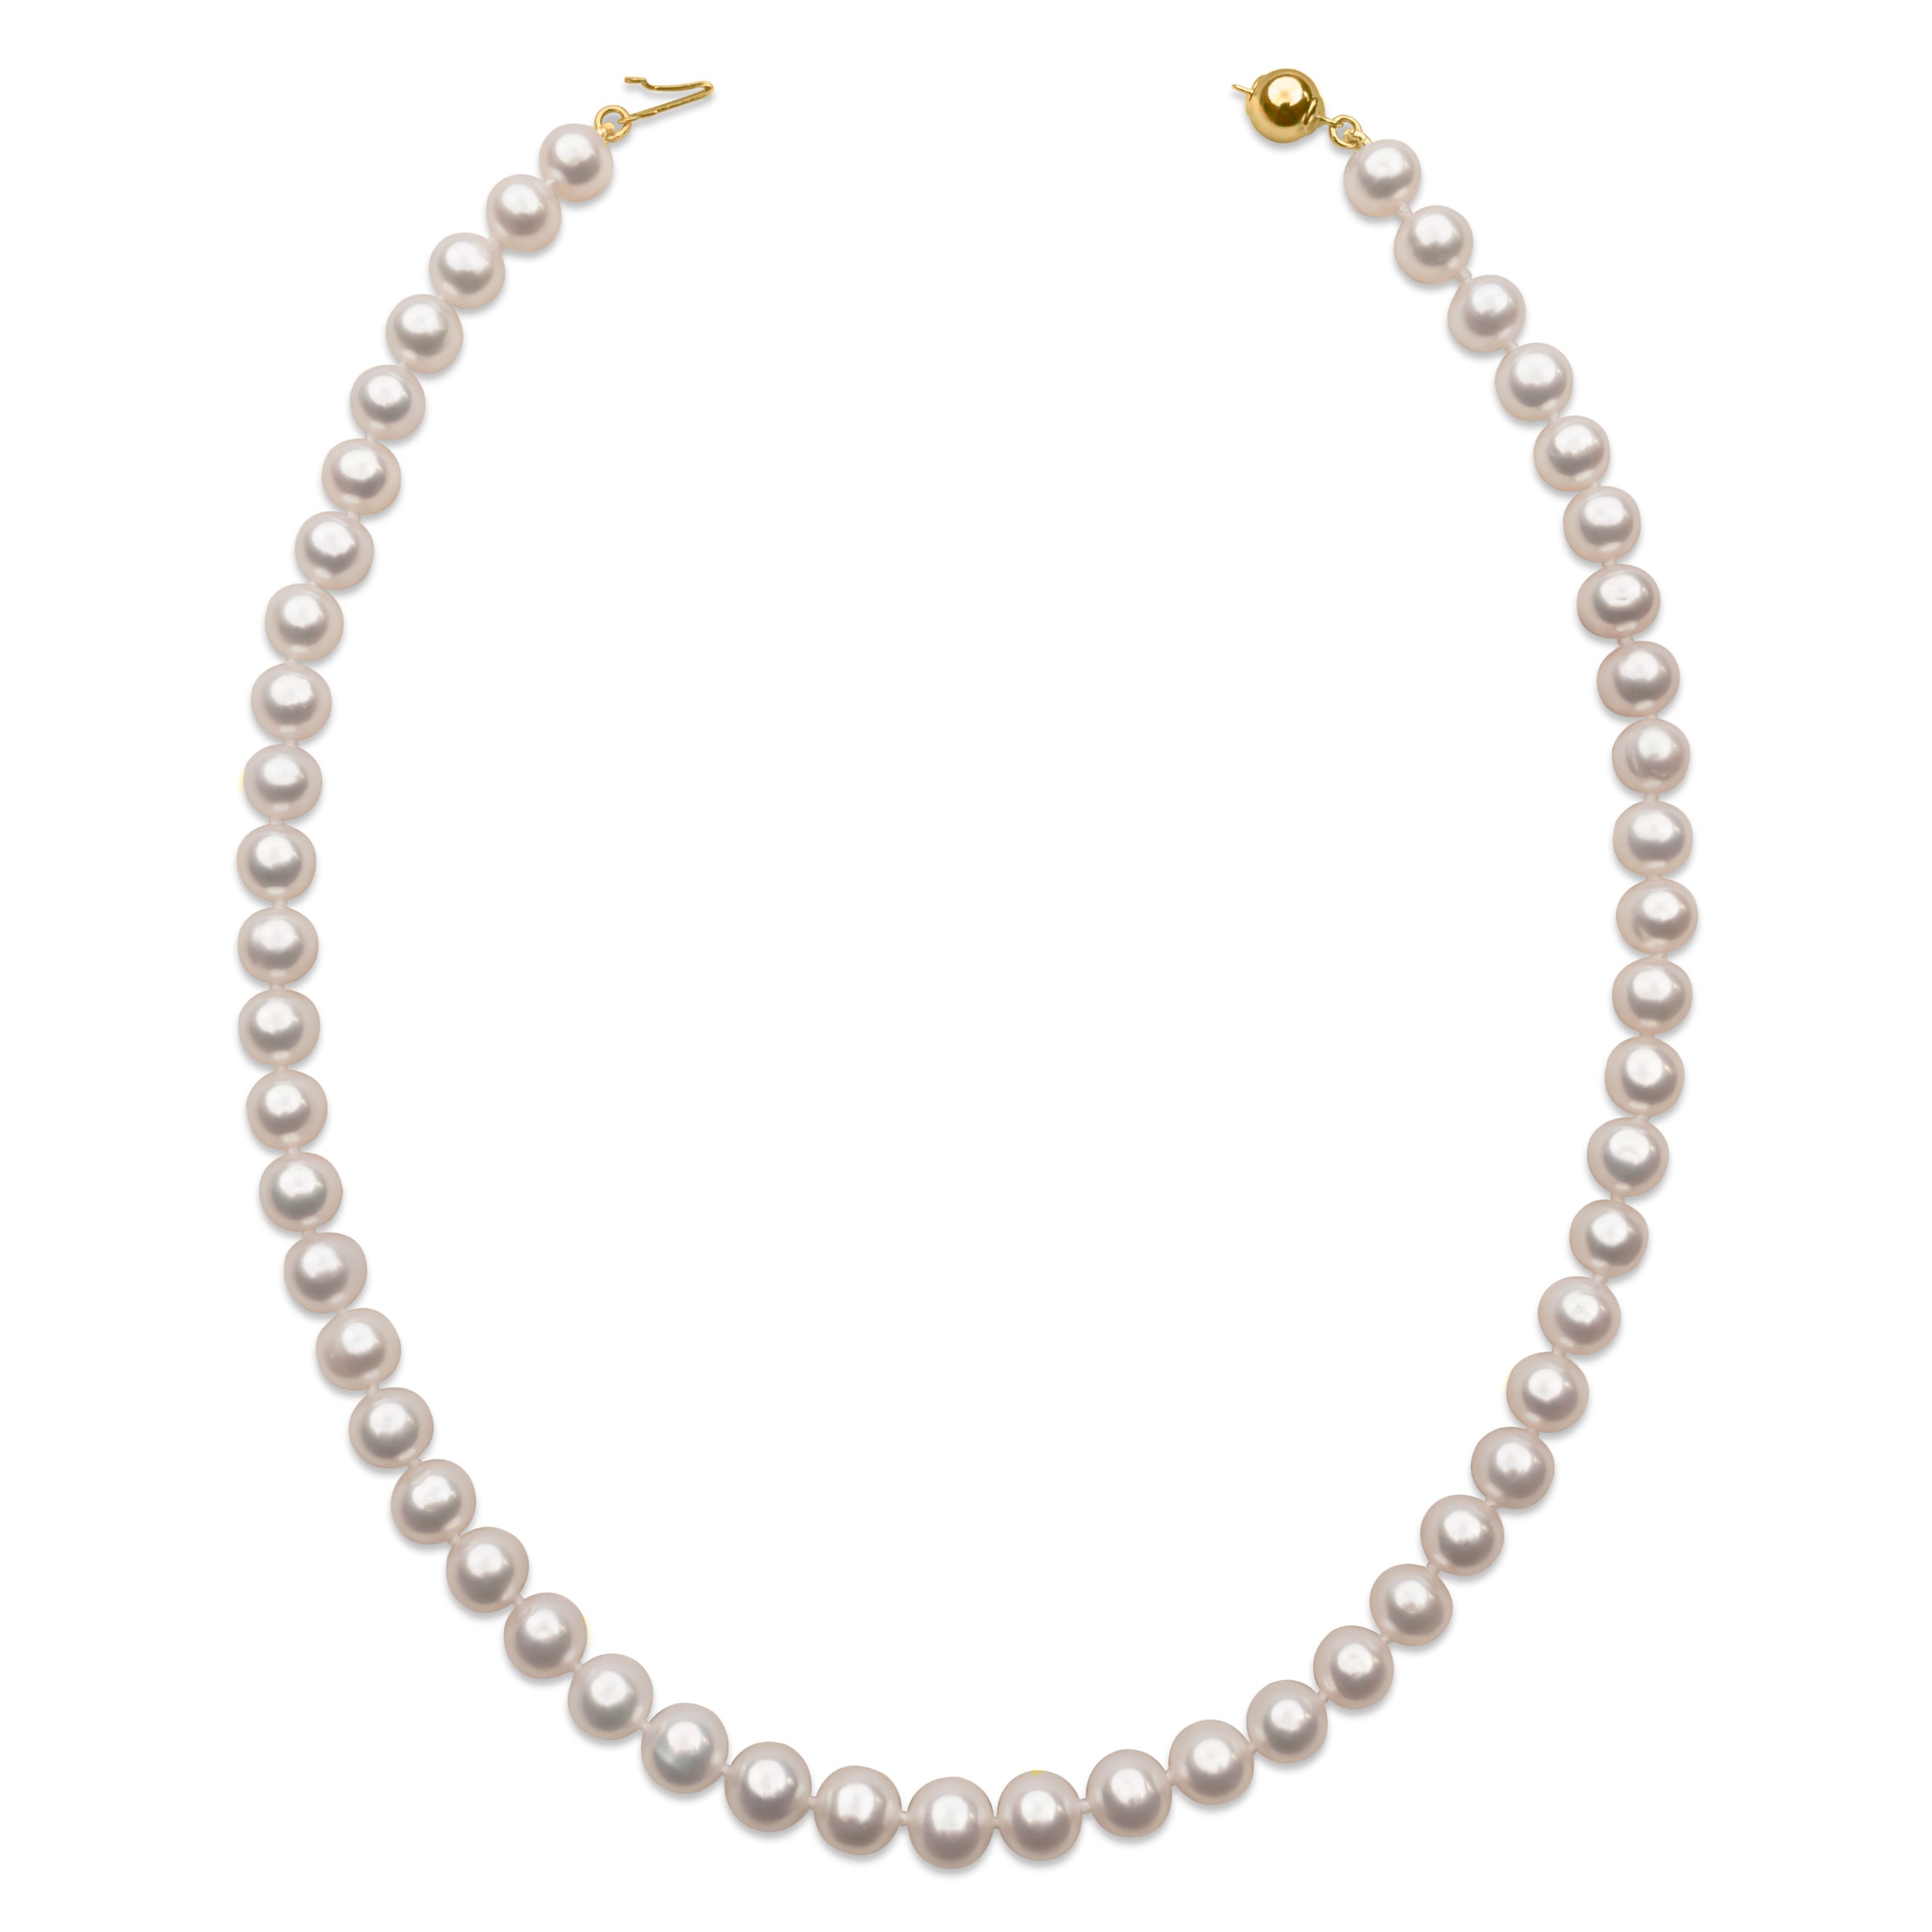 7.5-8.5mm AAA Freshwater Cultured Pearl Necklace, 60cm Long | 18K Gold